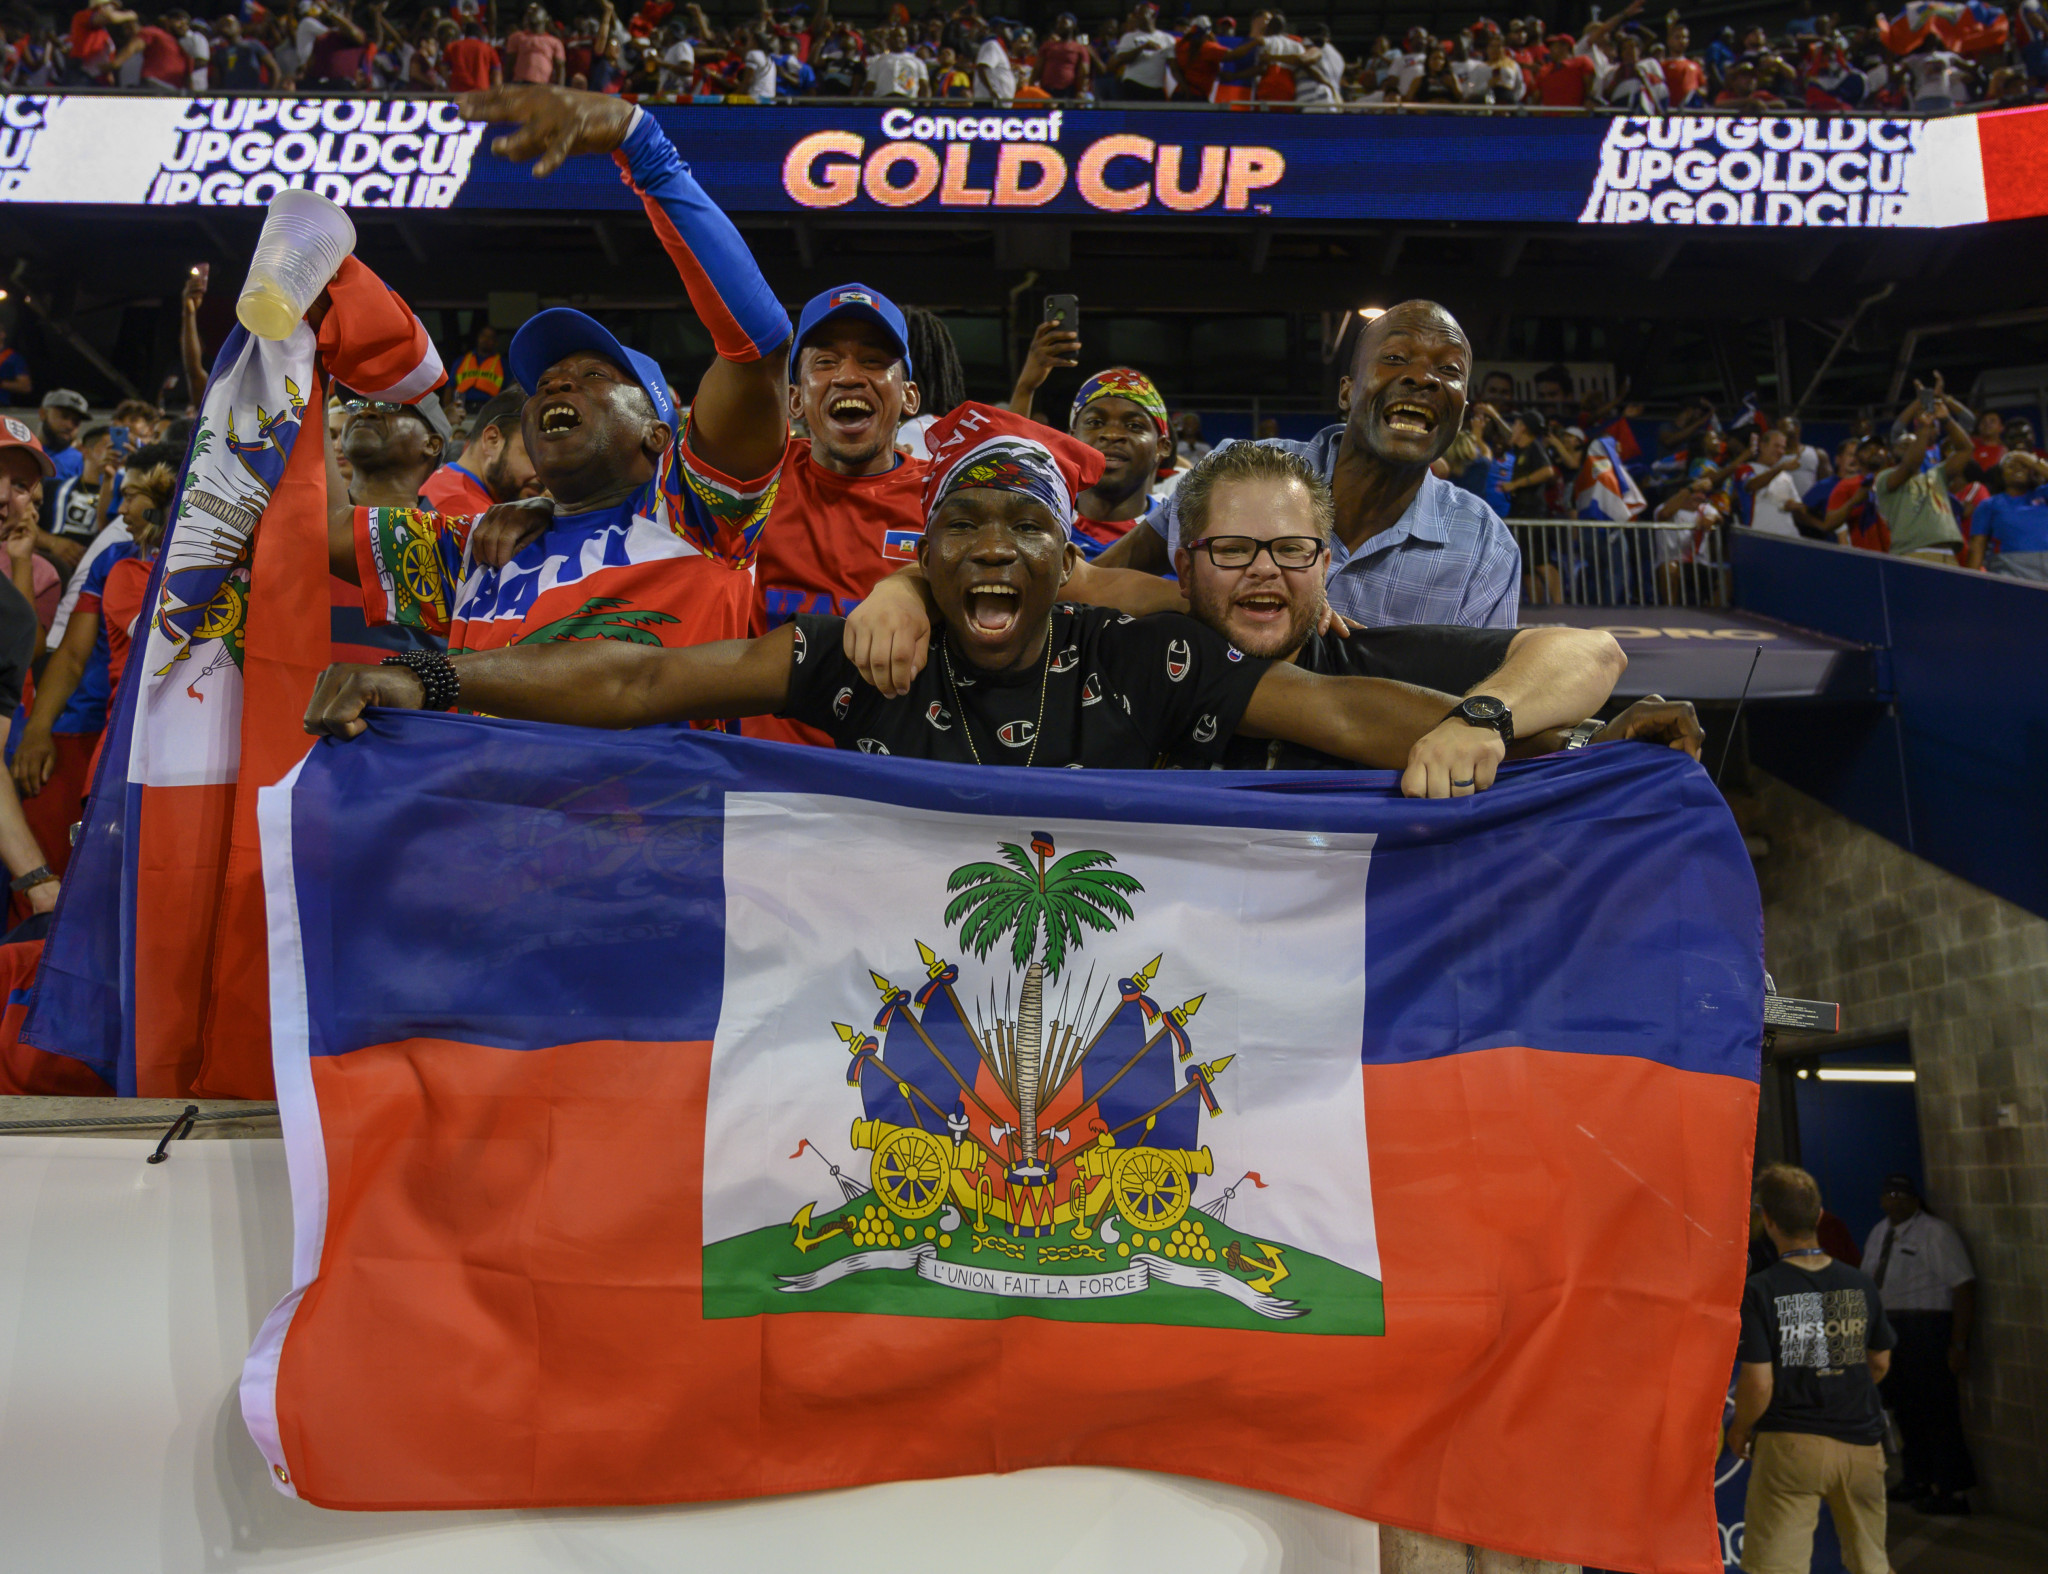 Alexis scores at both ends as Haiti top group at Gold Cup